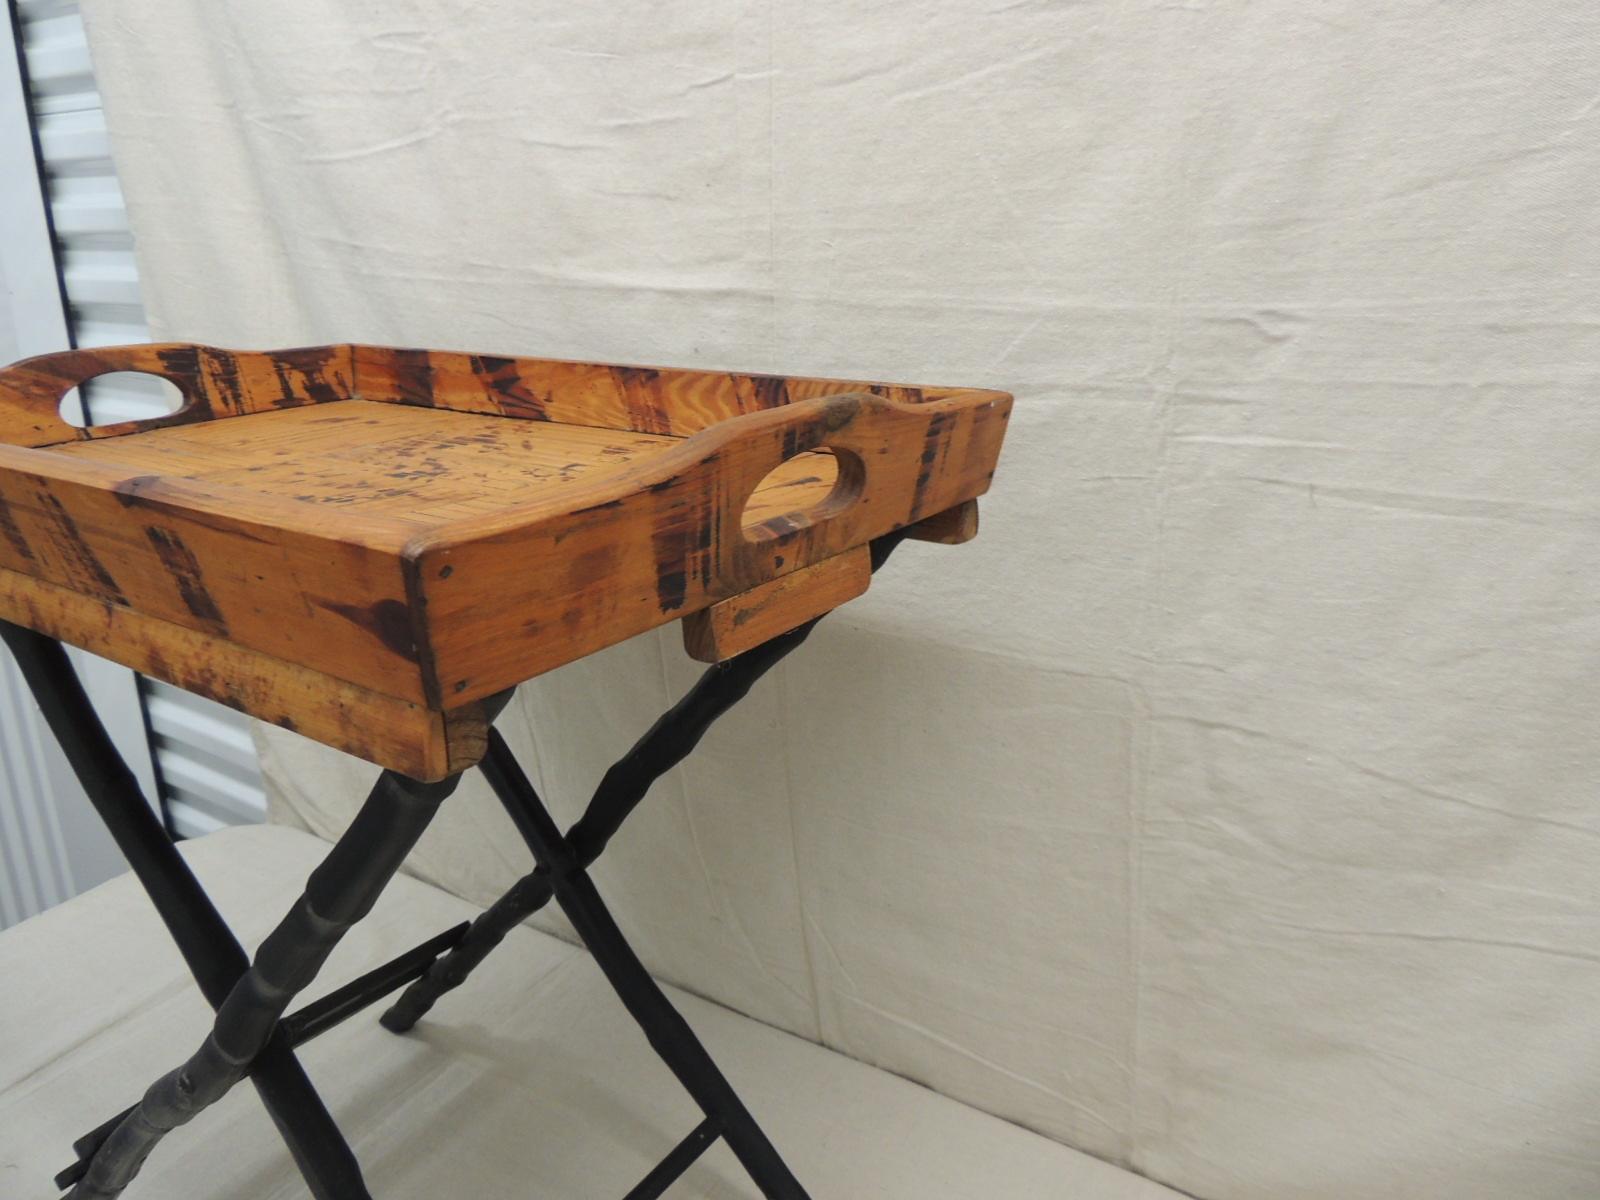 Hand-Crafted Faux-Tortoise Bamboo Folding Drinks Cart or Folding Tray Table